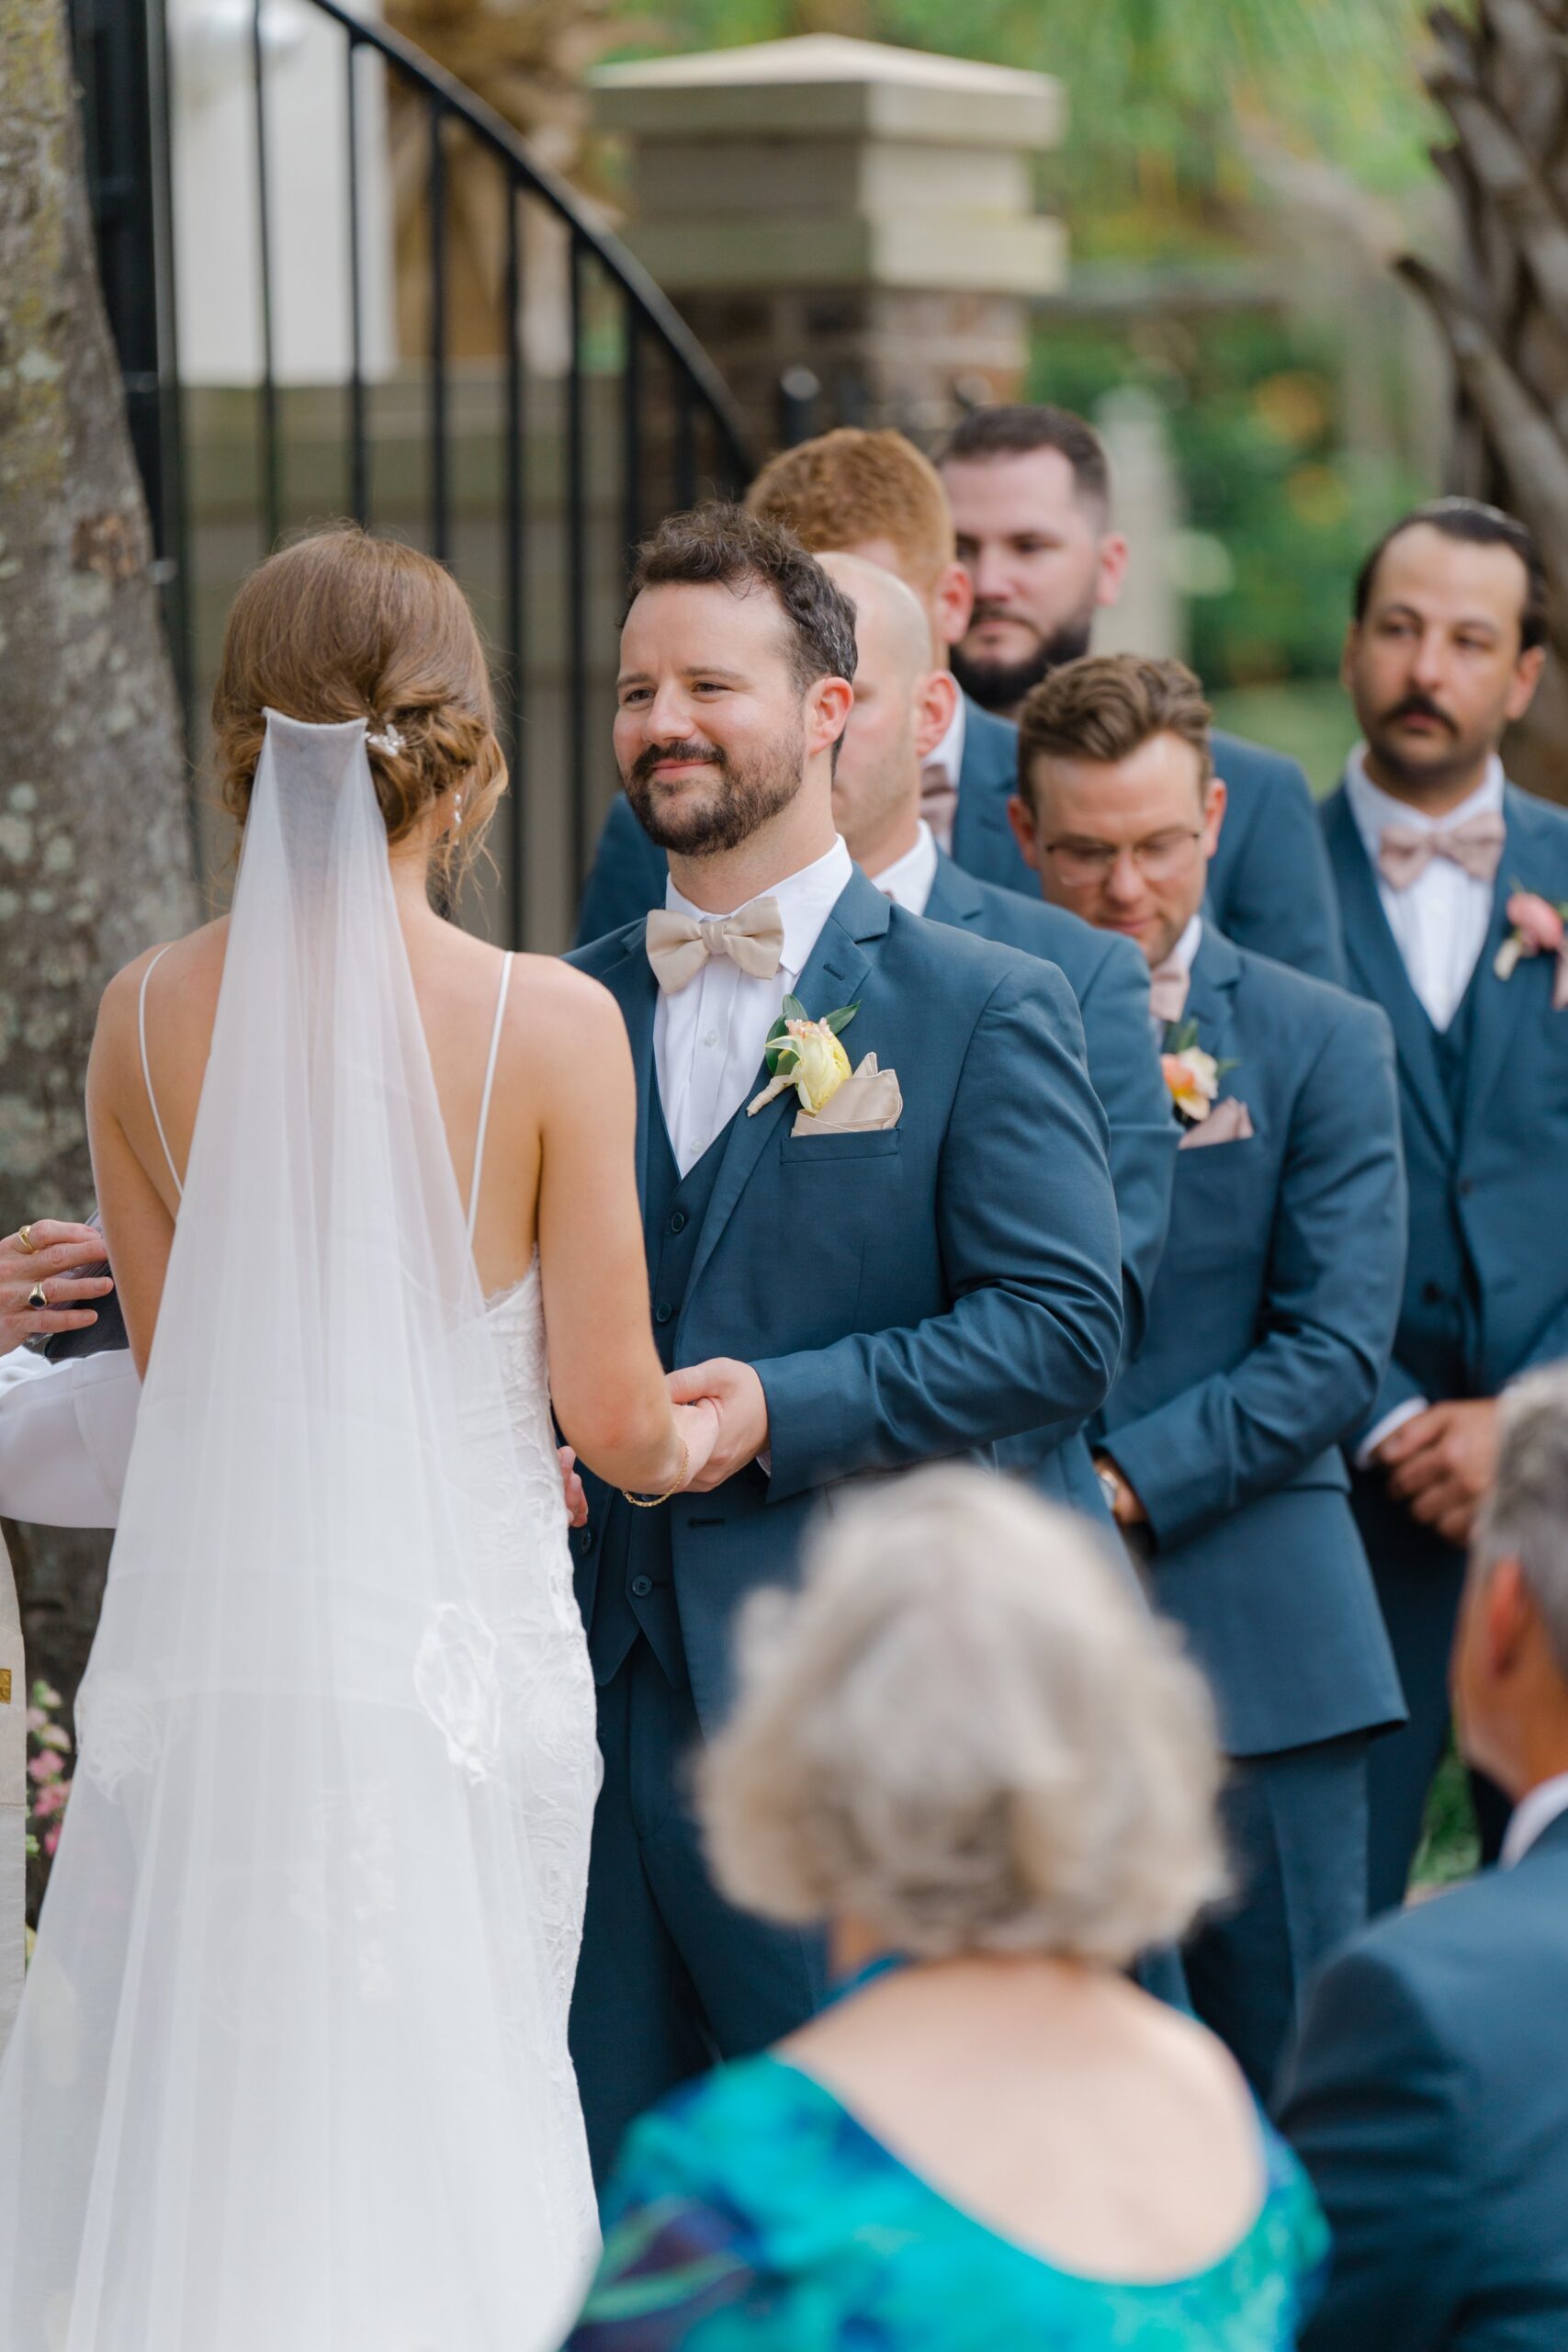 Groom looks at bride during outdoor spring wedding.